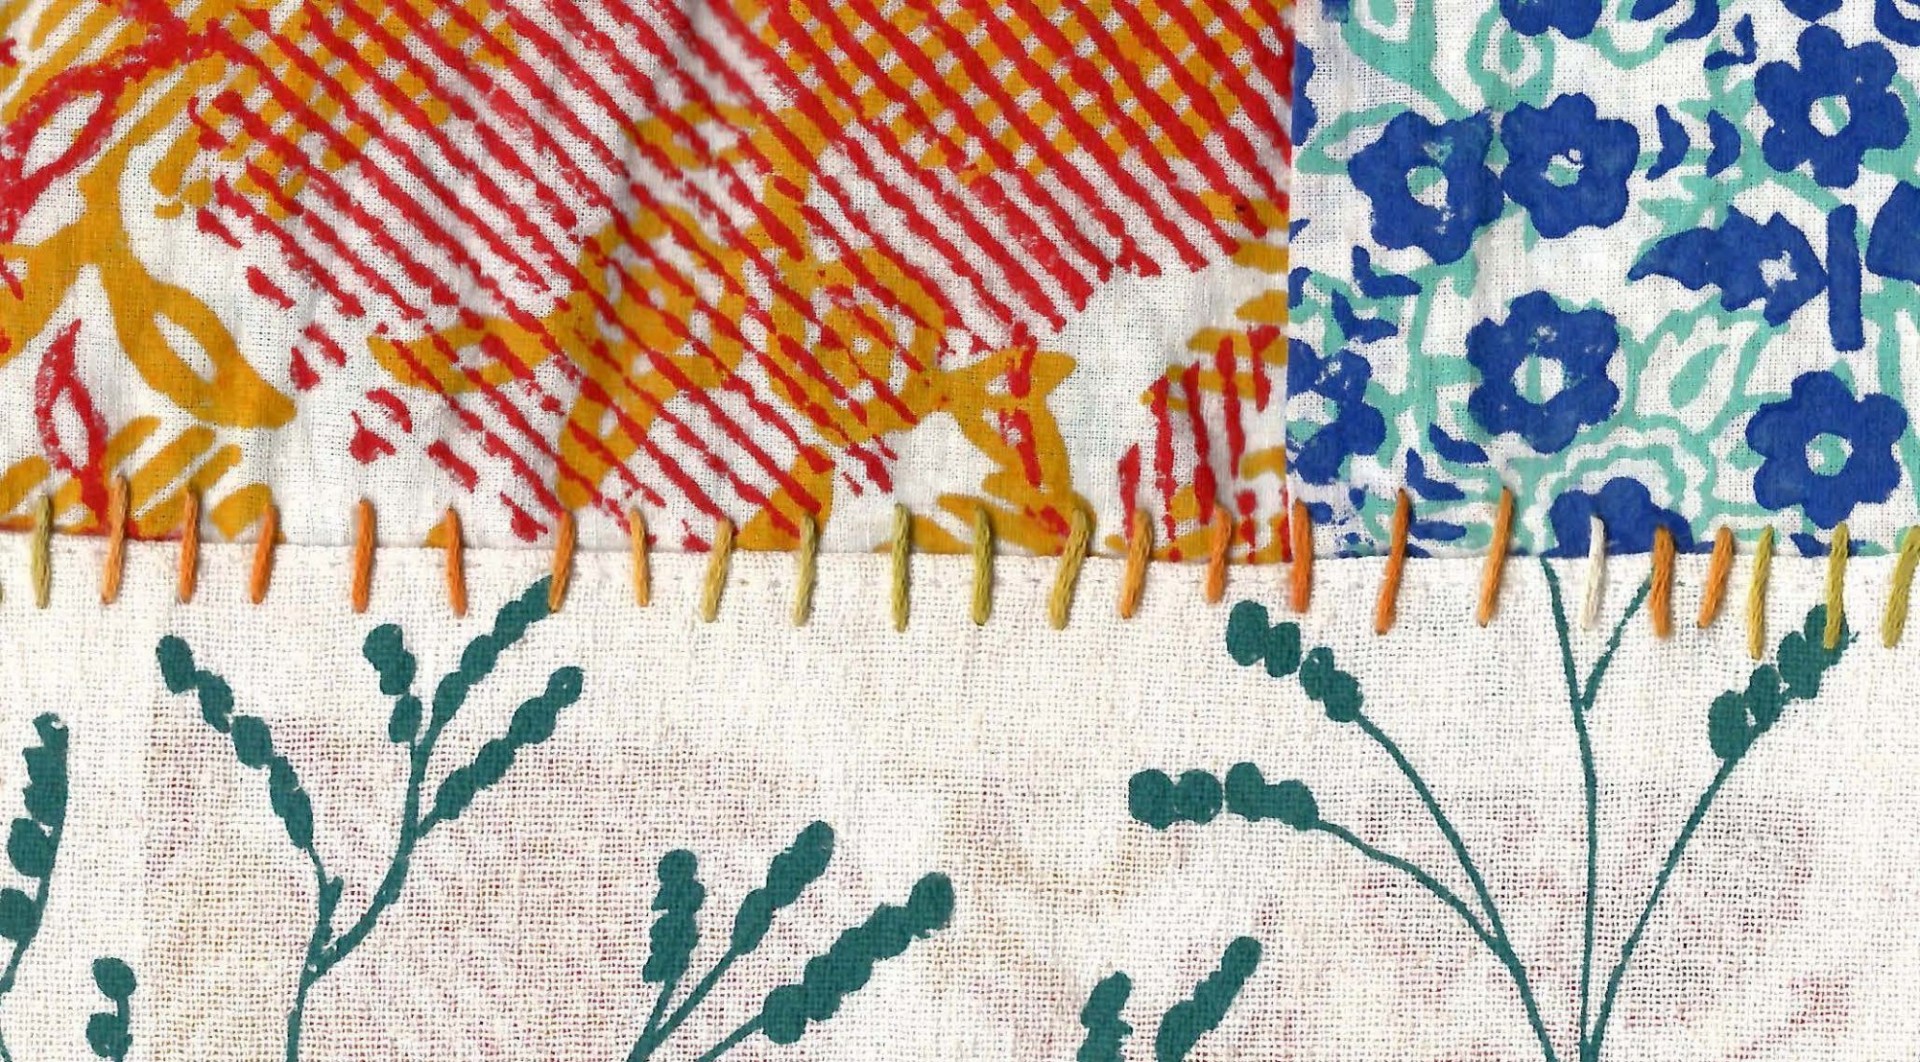 Kantha quilt by Cynthia Director